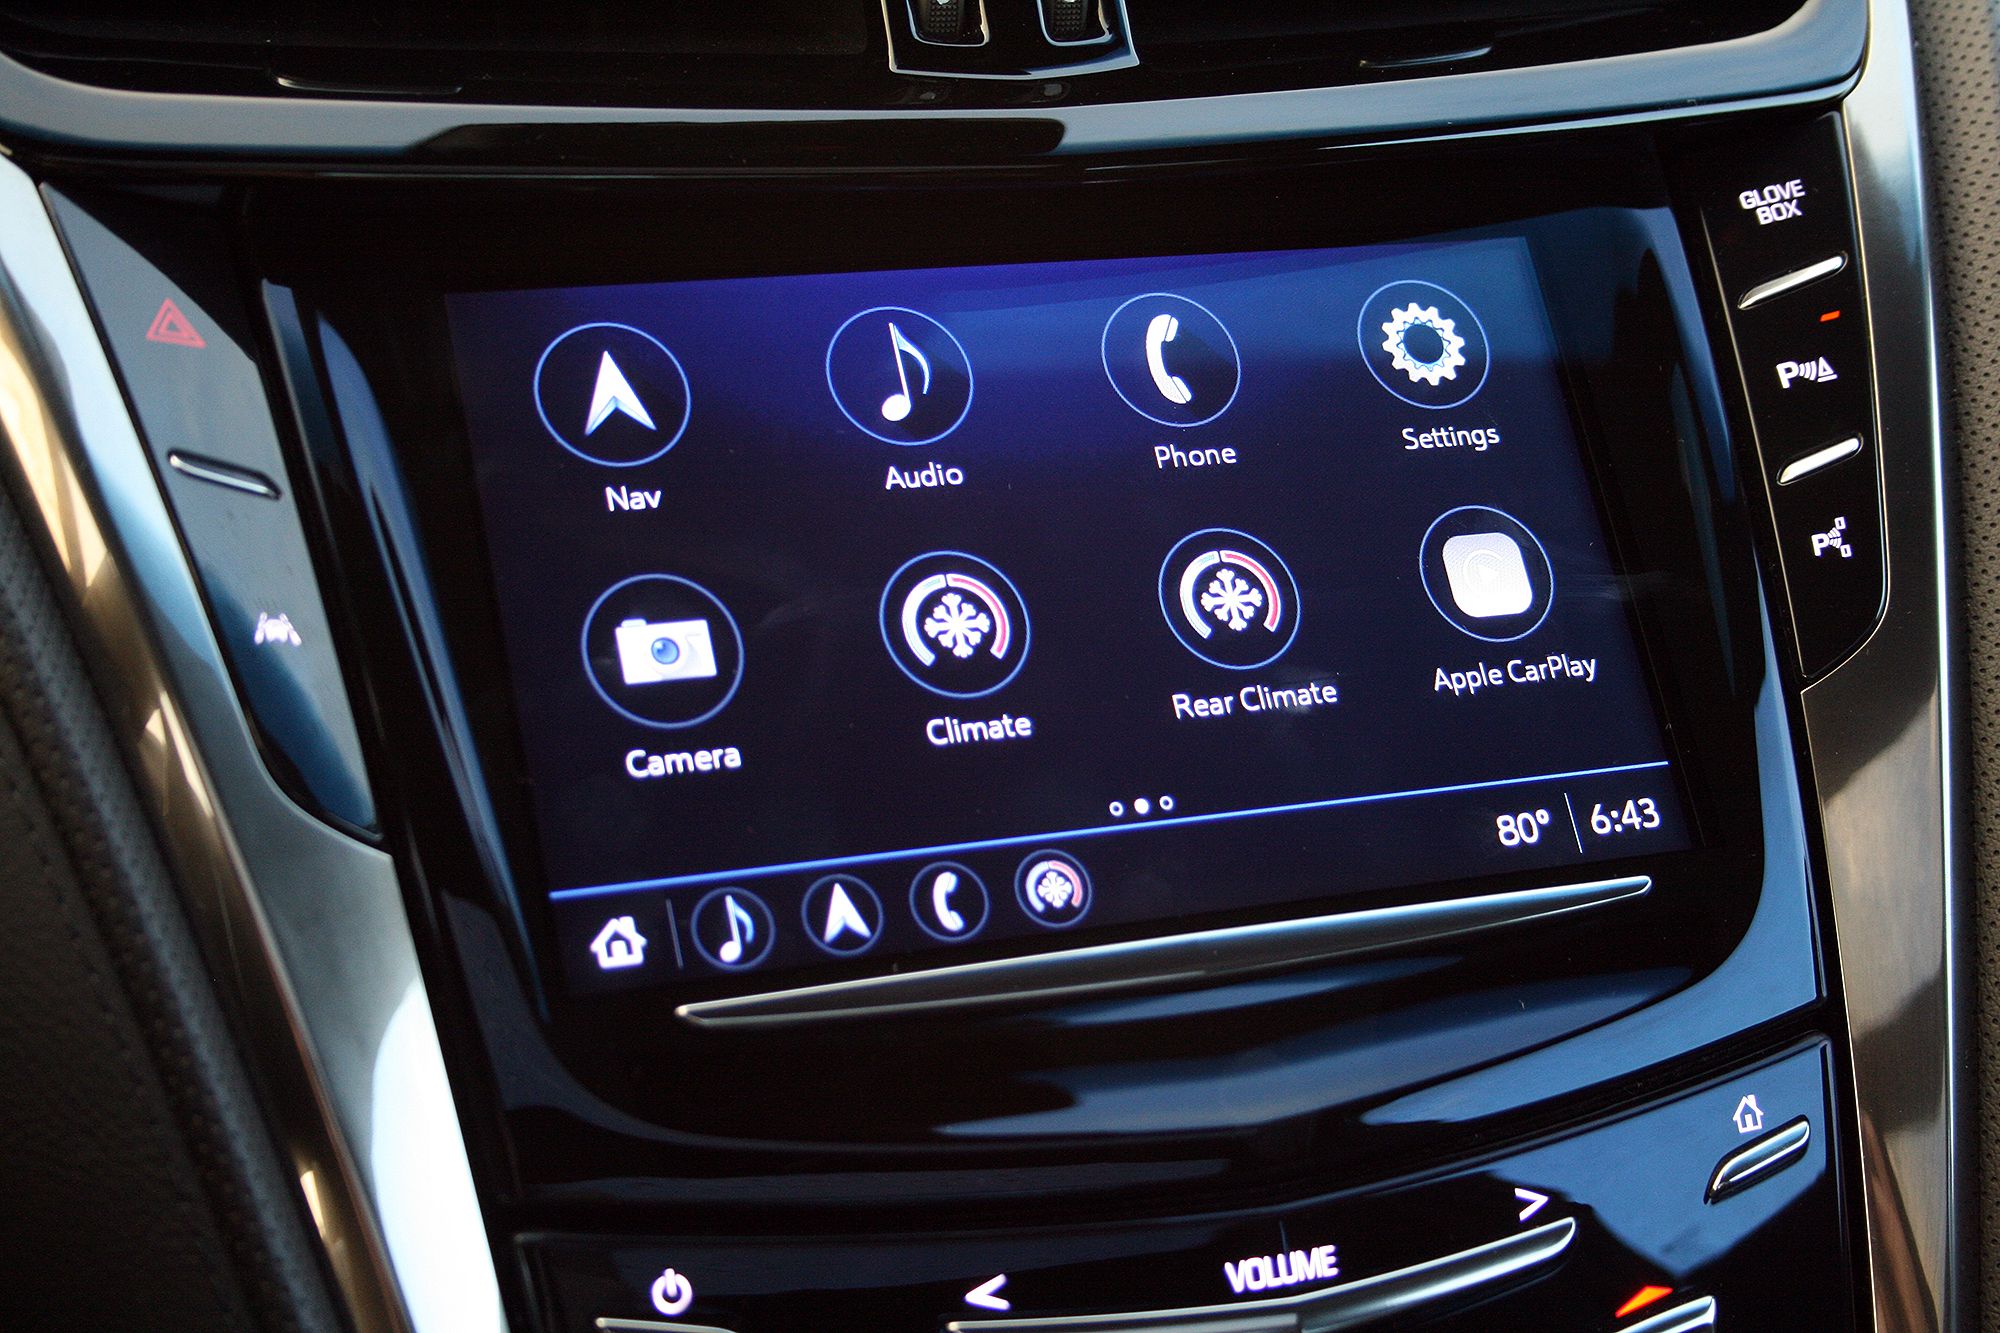 8-inch CUE infotainment system